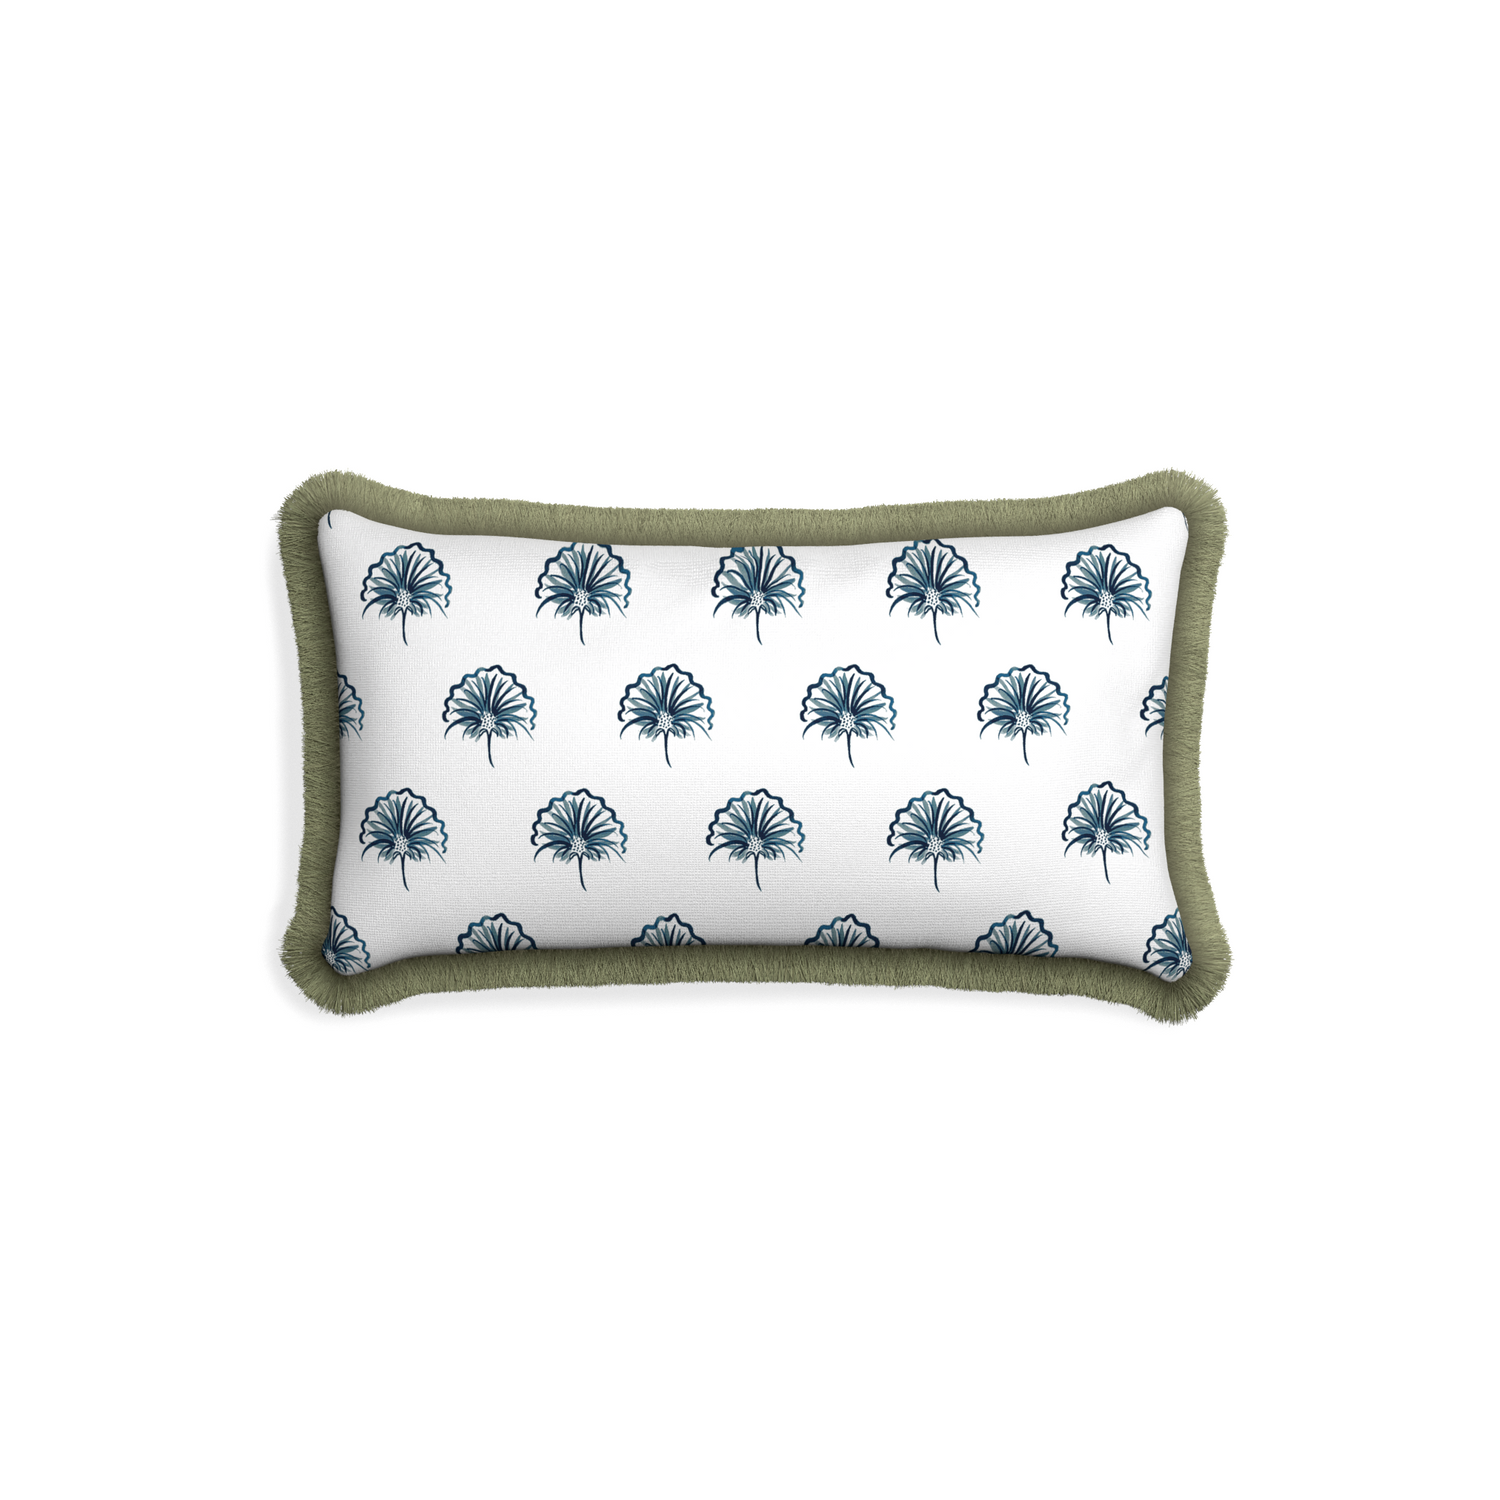 Petite-lumbar penelope midnight custom floral navypillow with sage fringe on white background